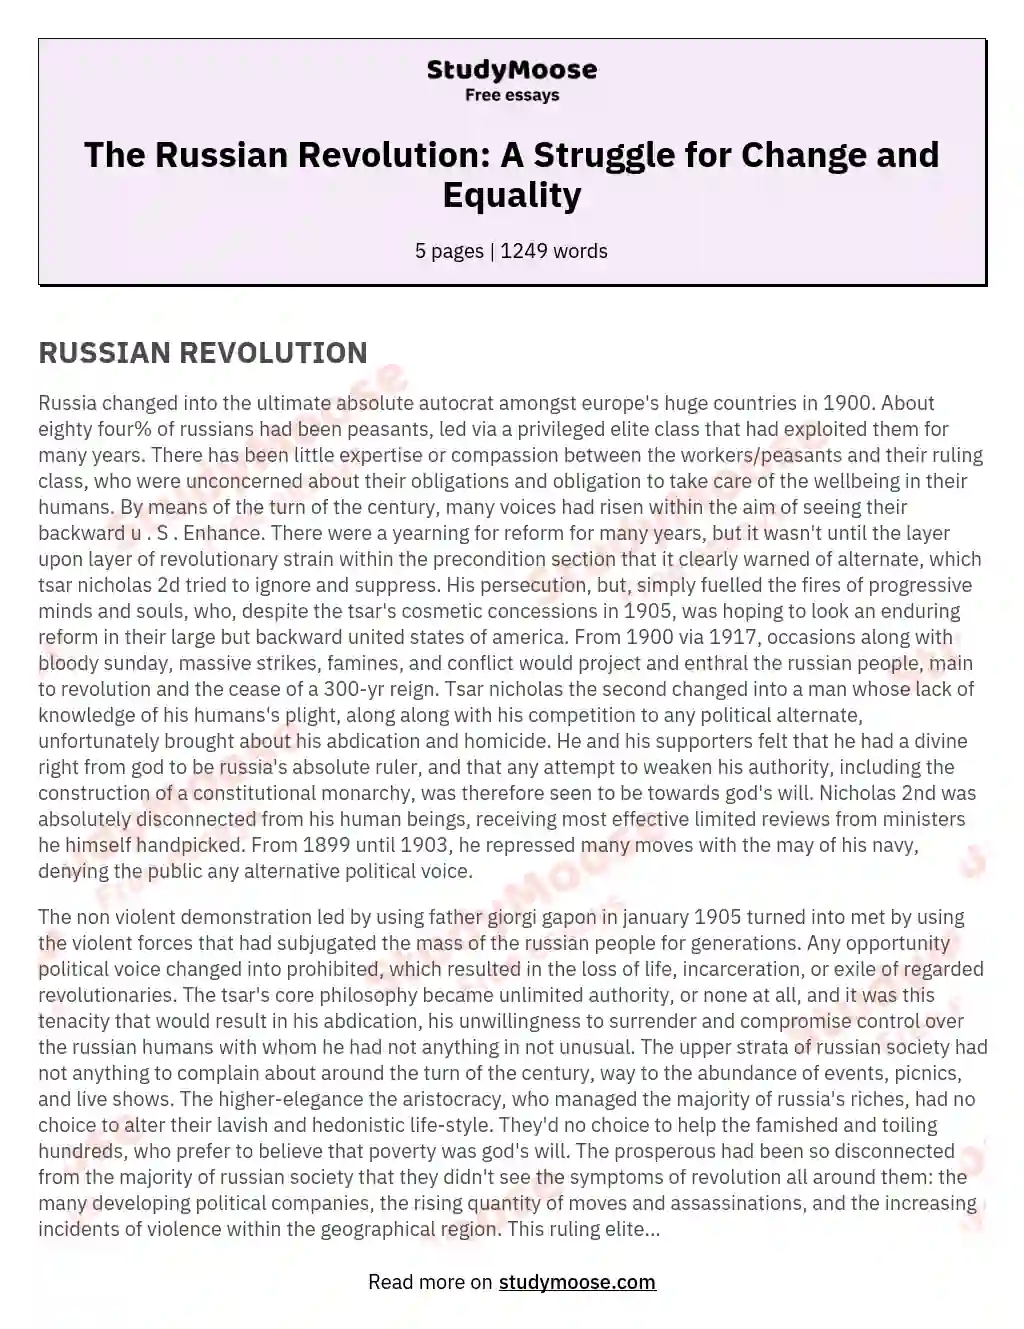 The Russian Revolution: A Struggle for Change and Equality essay